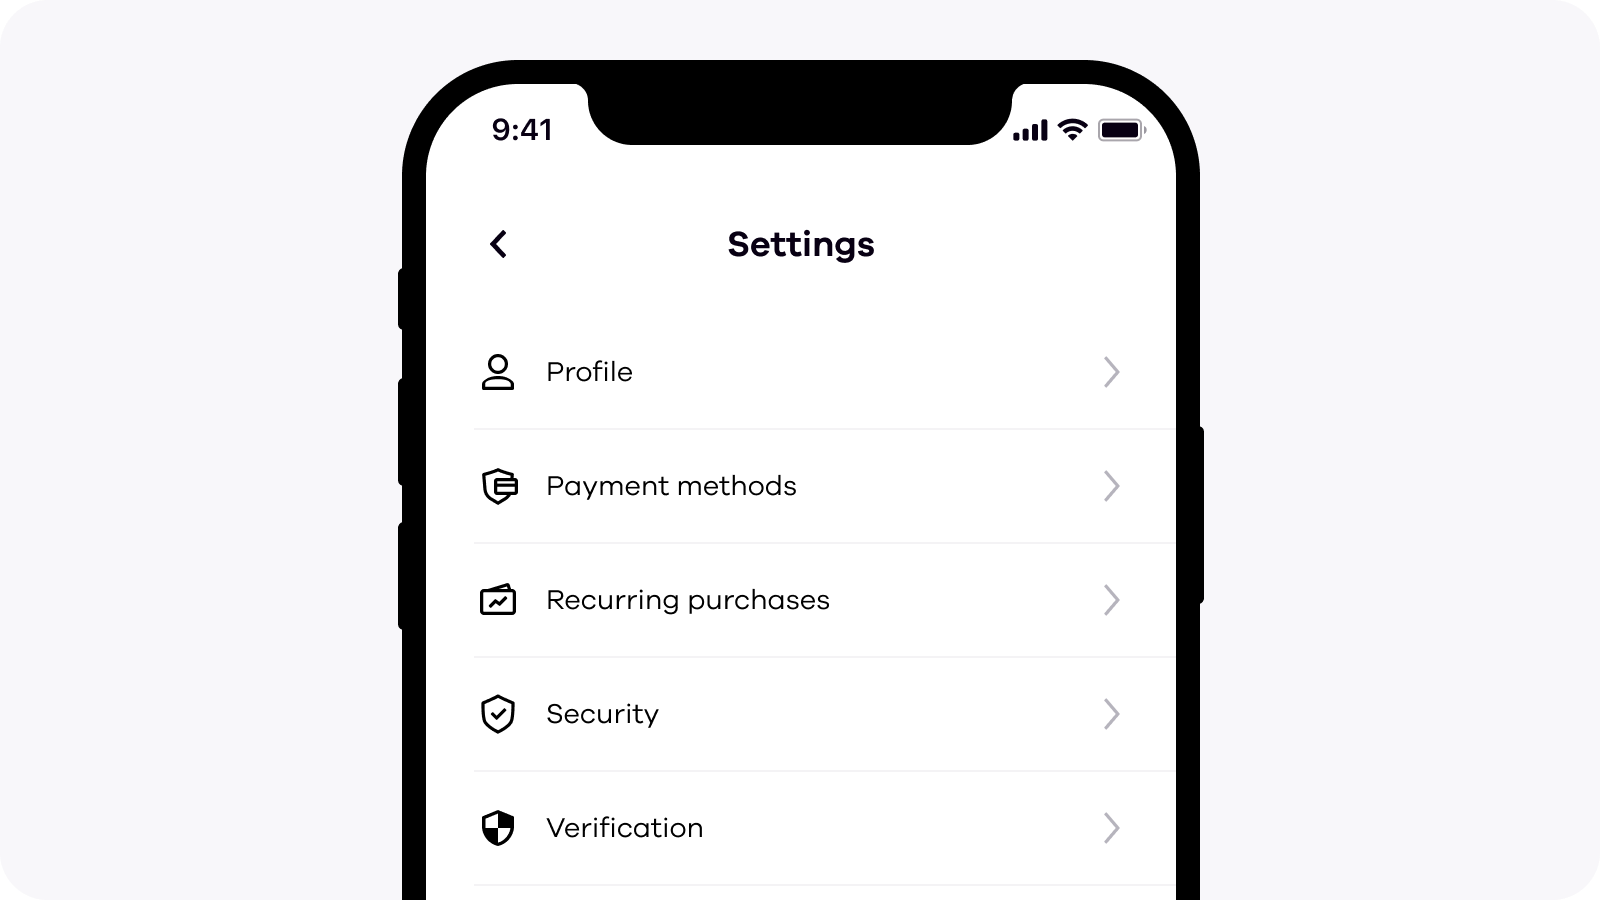 Okcoin app Settings menu with Recurring purchases tab